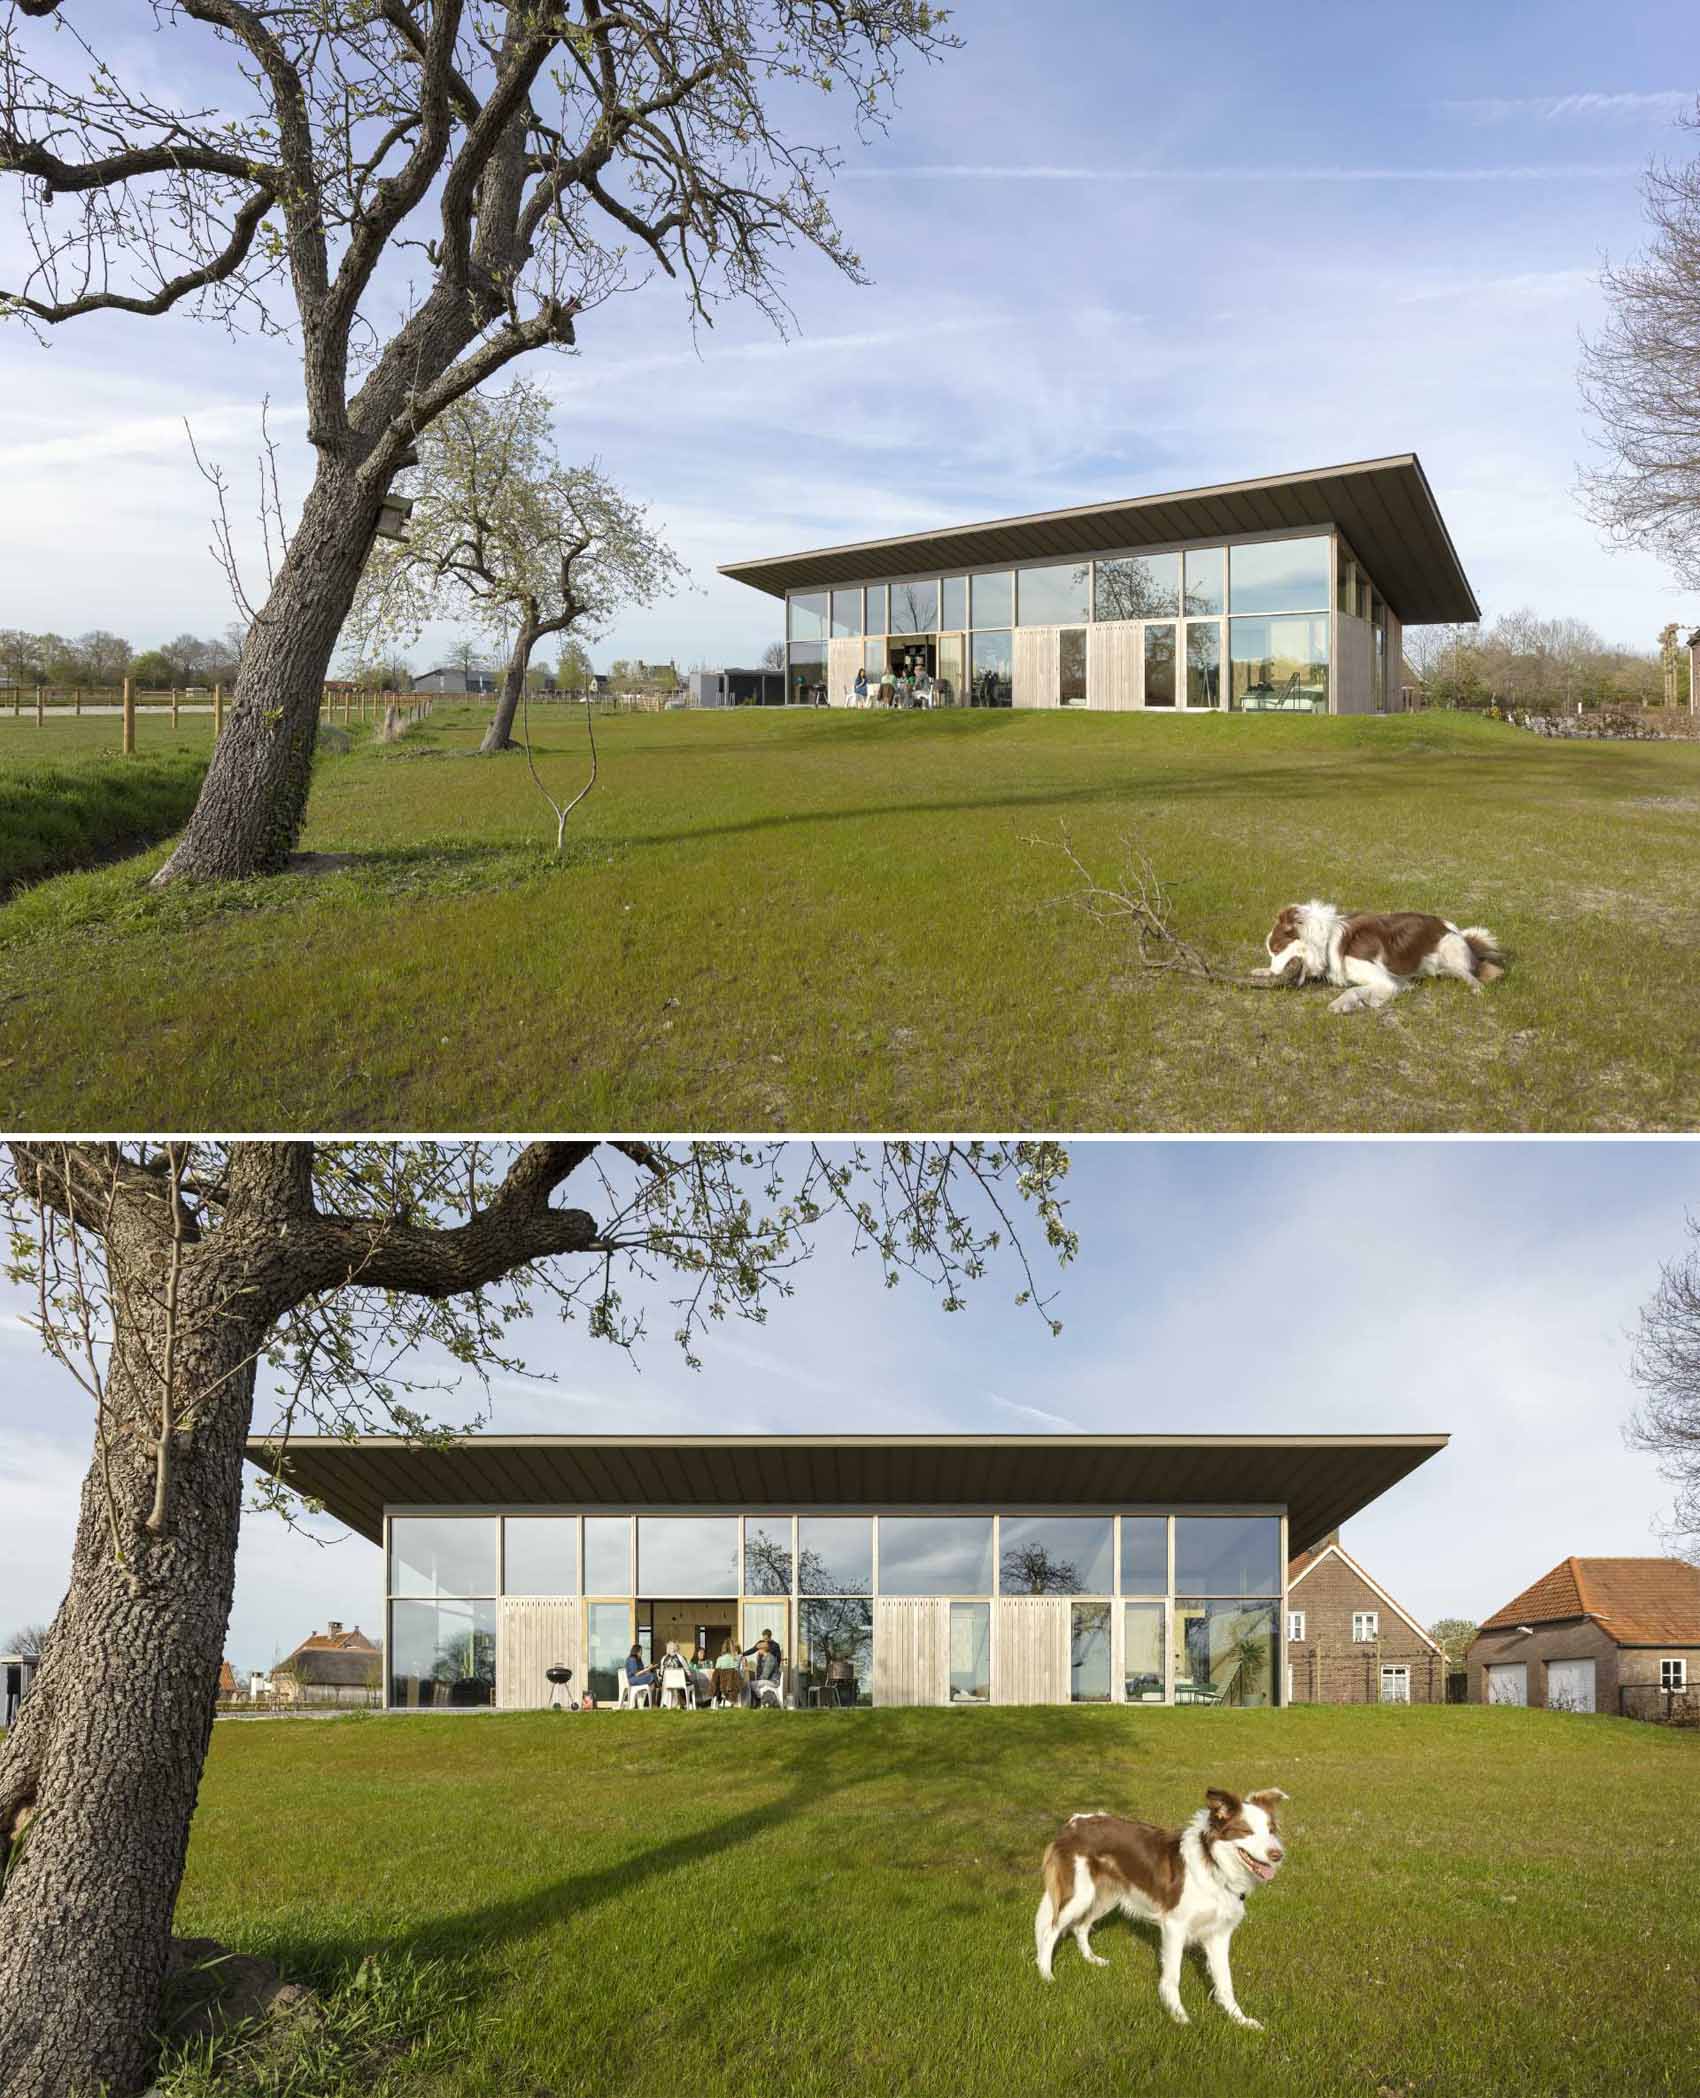 This modern home has a tall glass facade and a extended sloped roof.